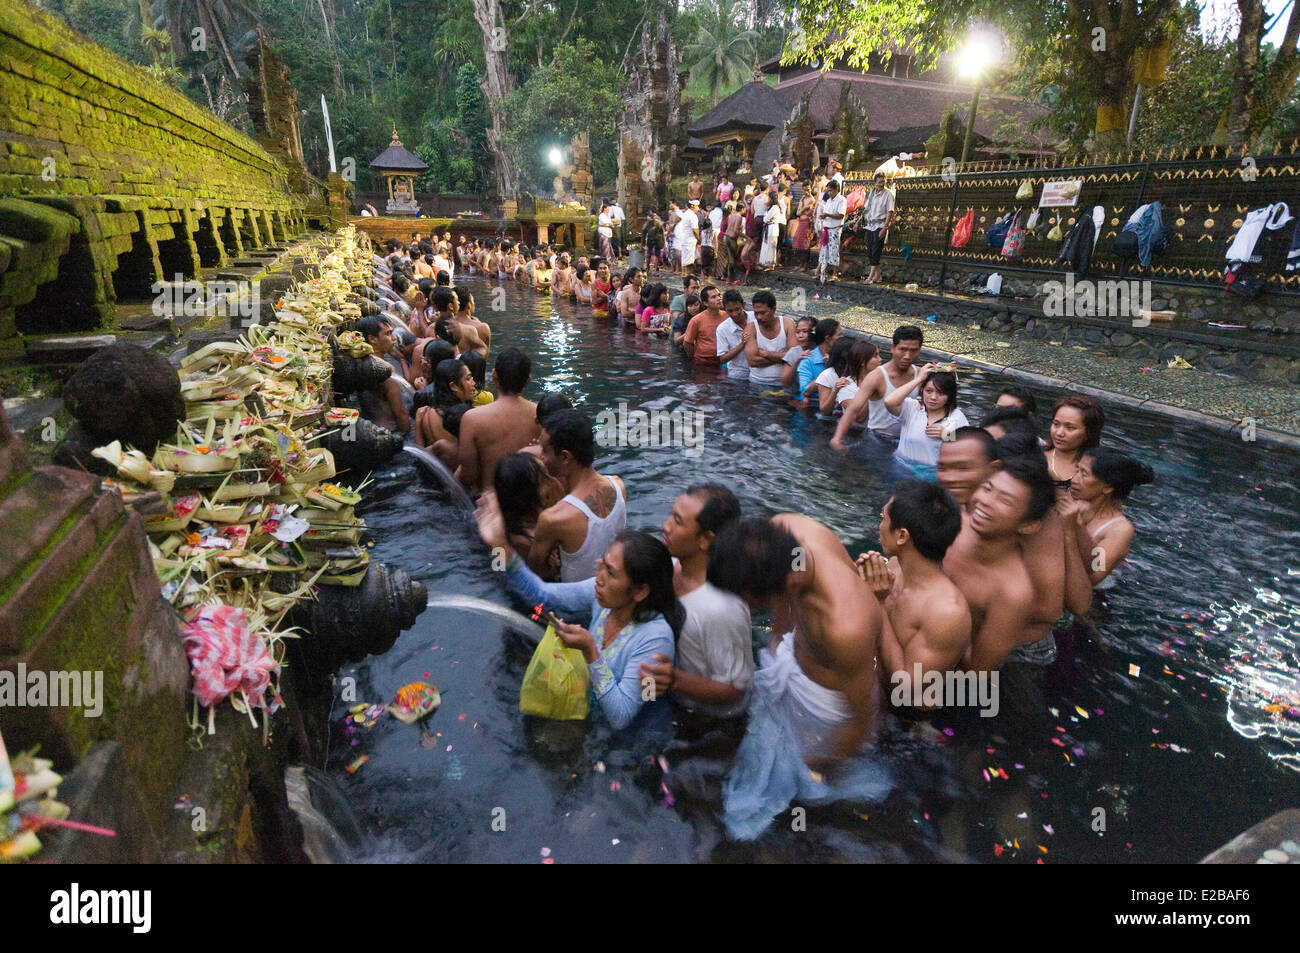 Indonesia, Bali, Tampaksiring temple and sacred baths Tirta Empul, crowd in water purifying Stock Photo